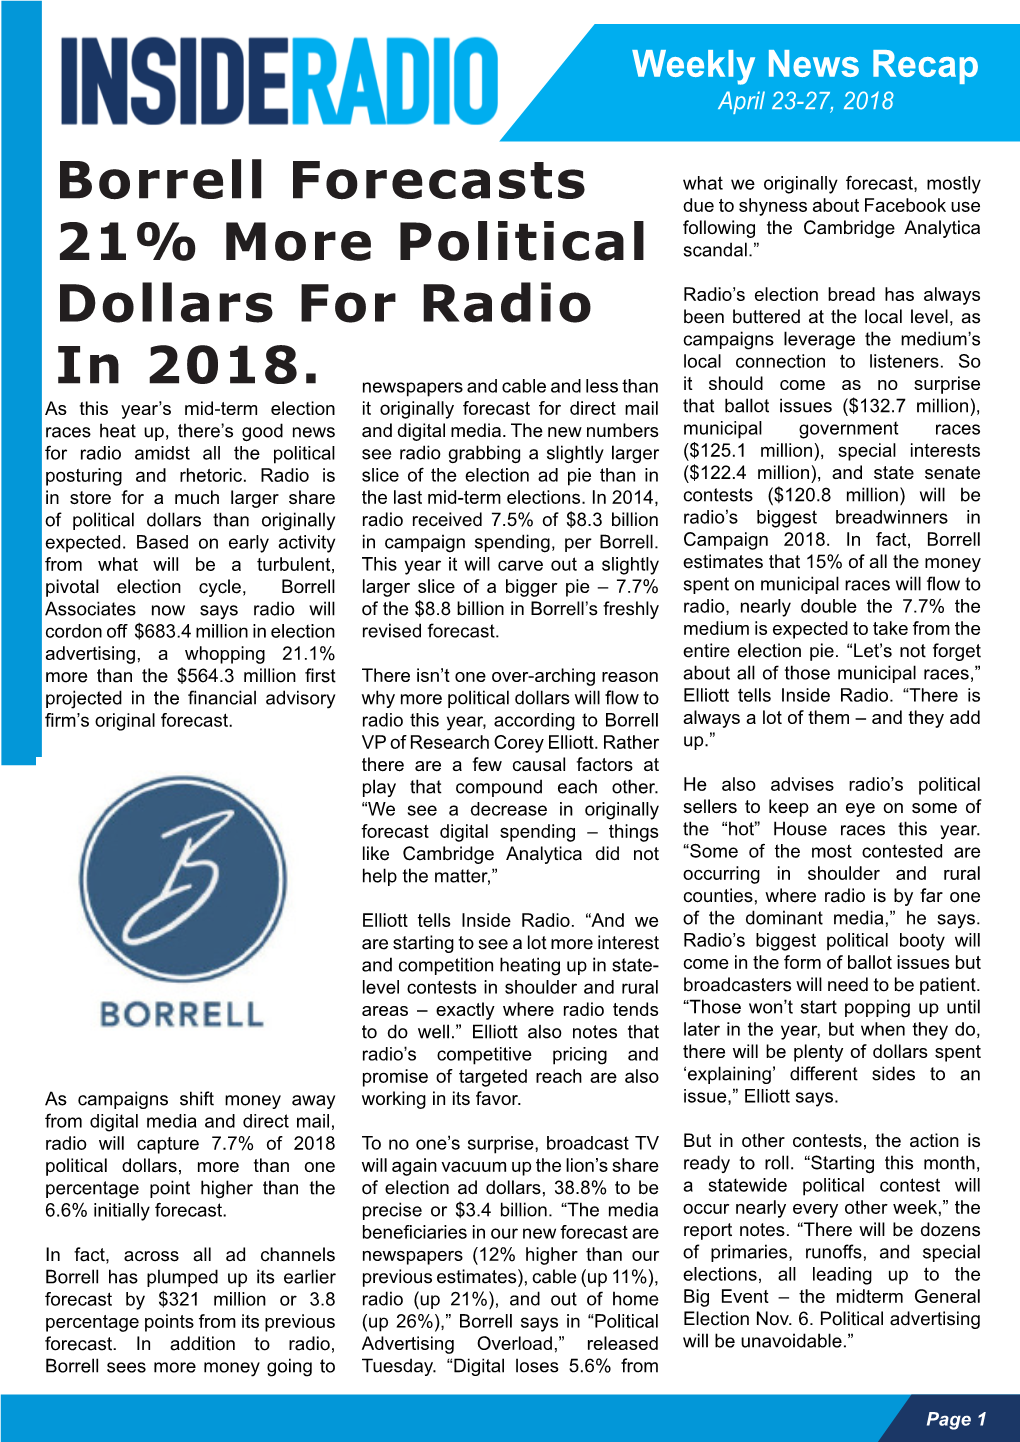 Borrell Forecasts 21% More Political Dollars for Radio